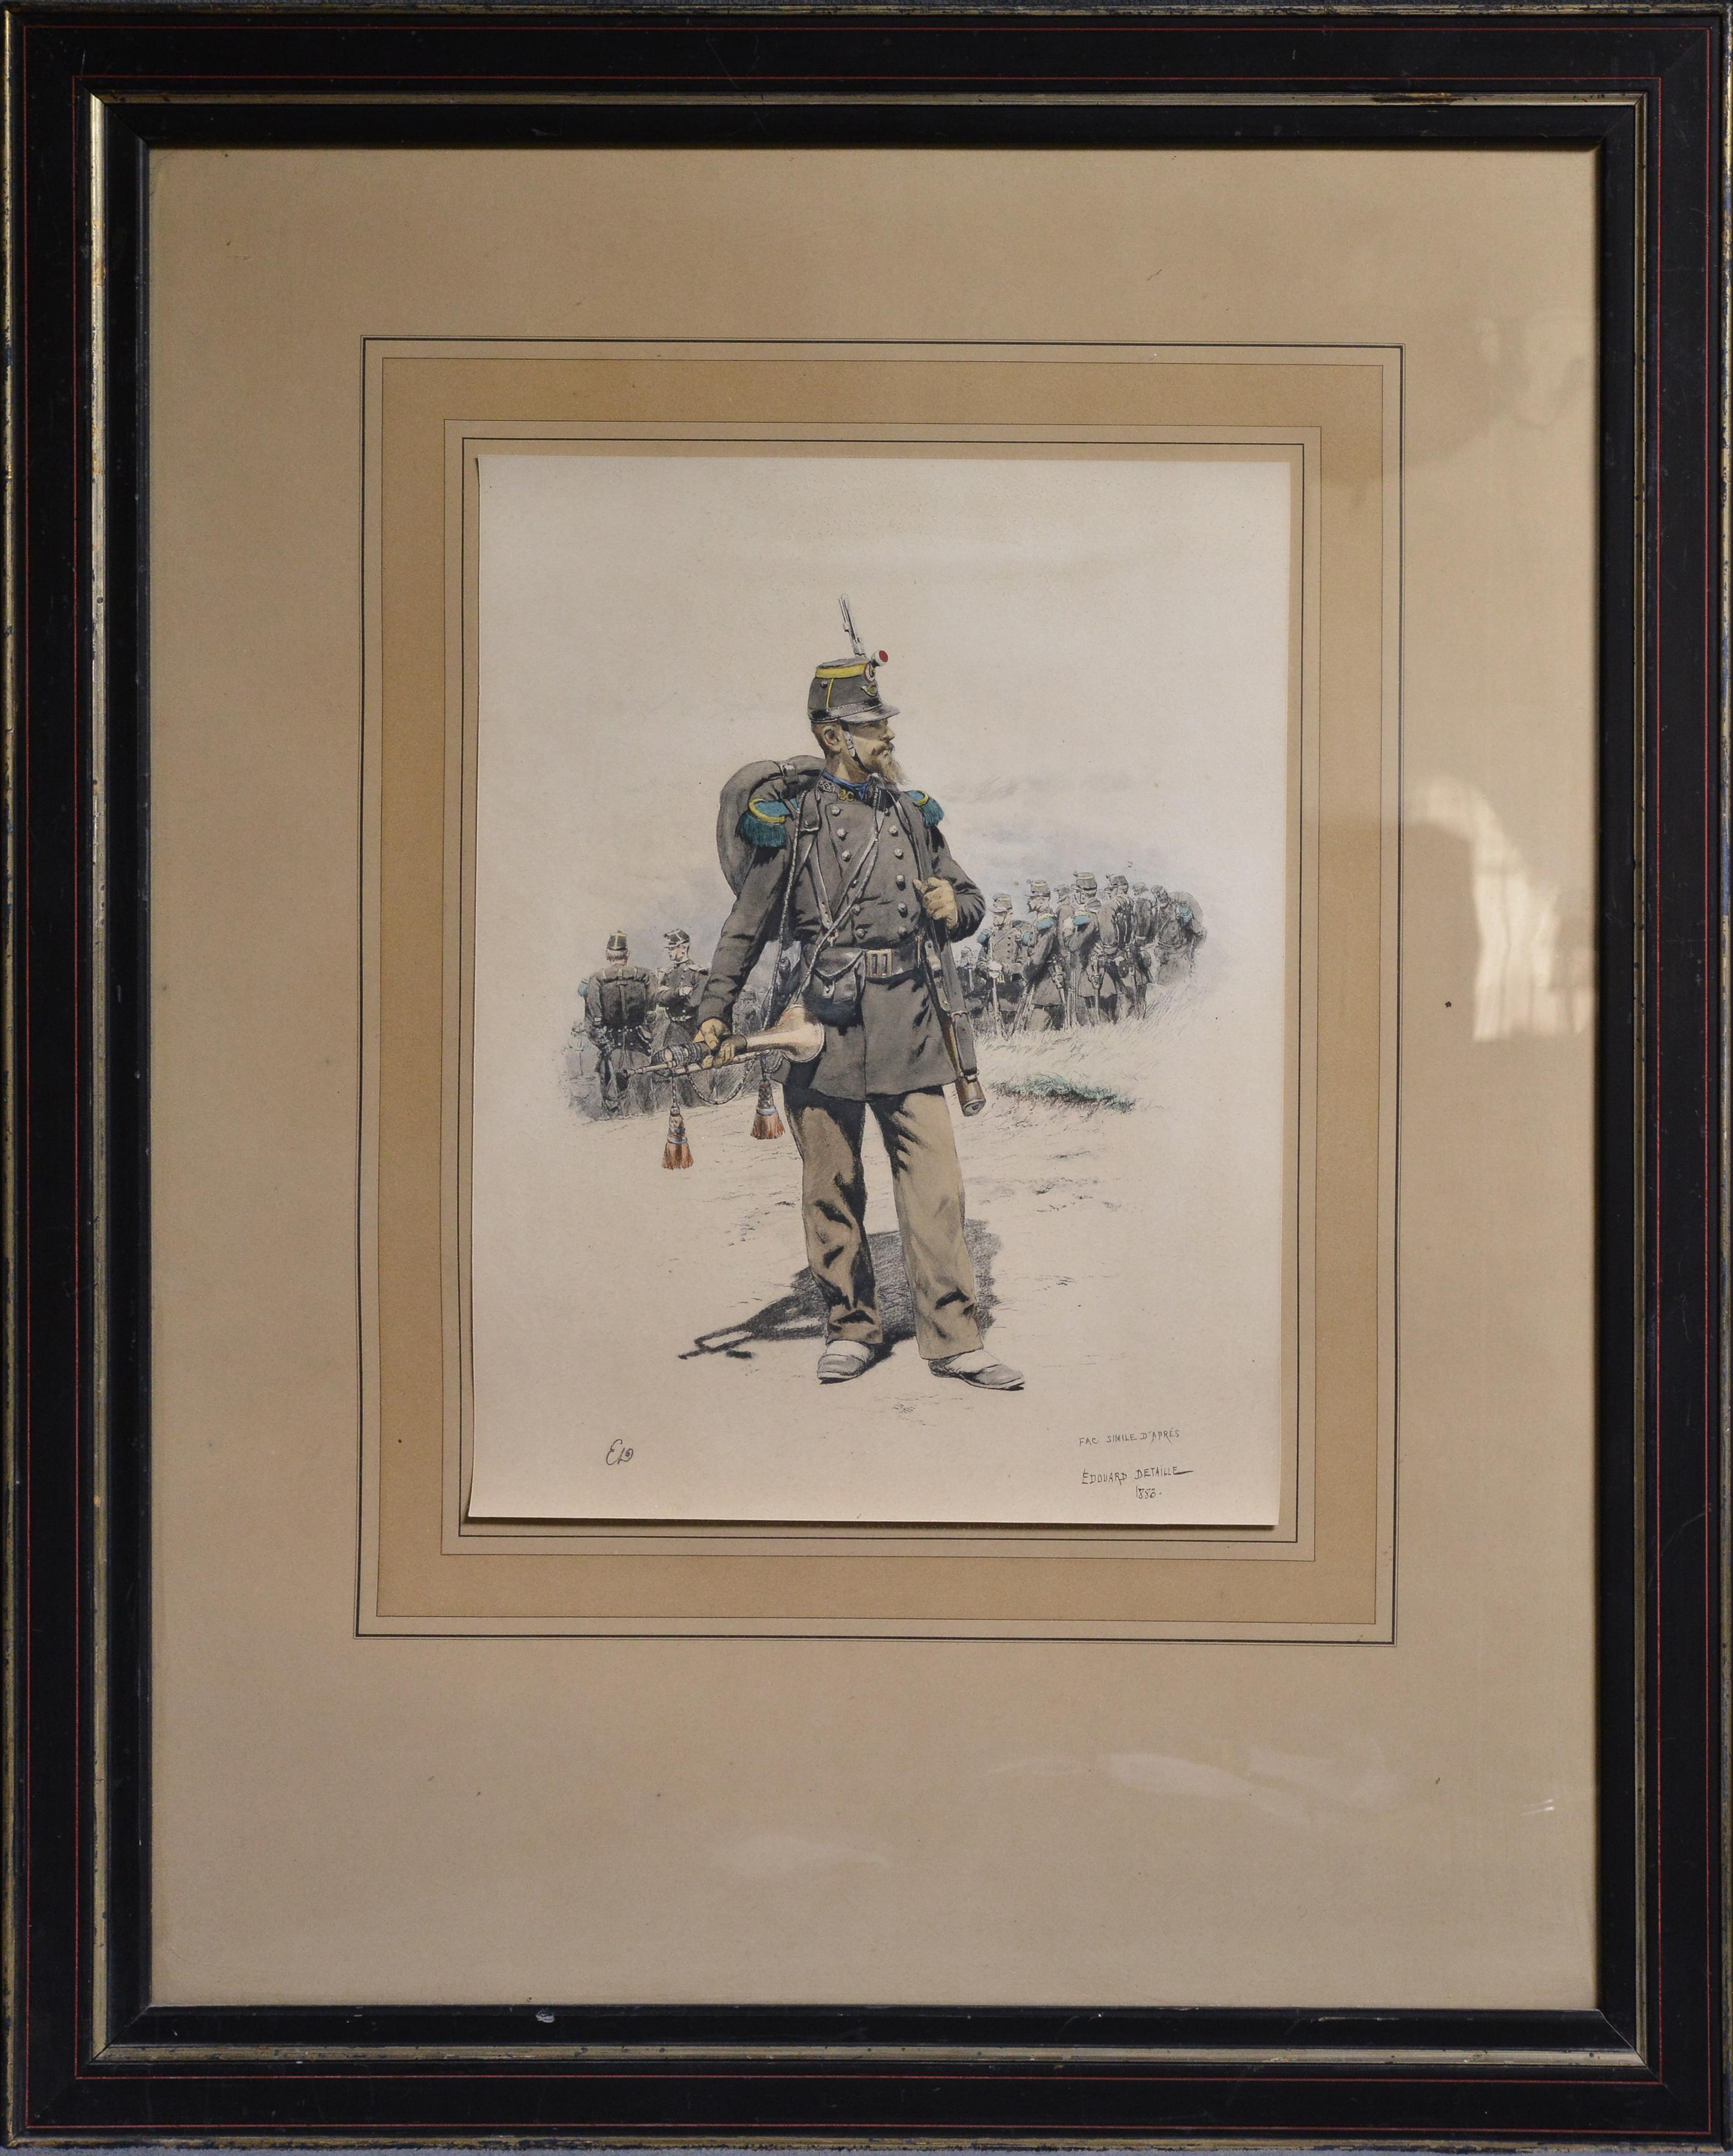 Jean Baptiste Édouard Detaille Figurative Print - Bugler of Chasseurs Corps by Ed Detaille 19th Century Facsimile Color Lithograph